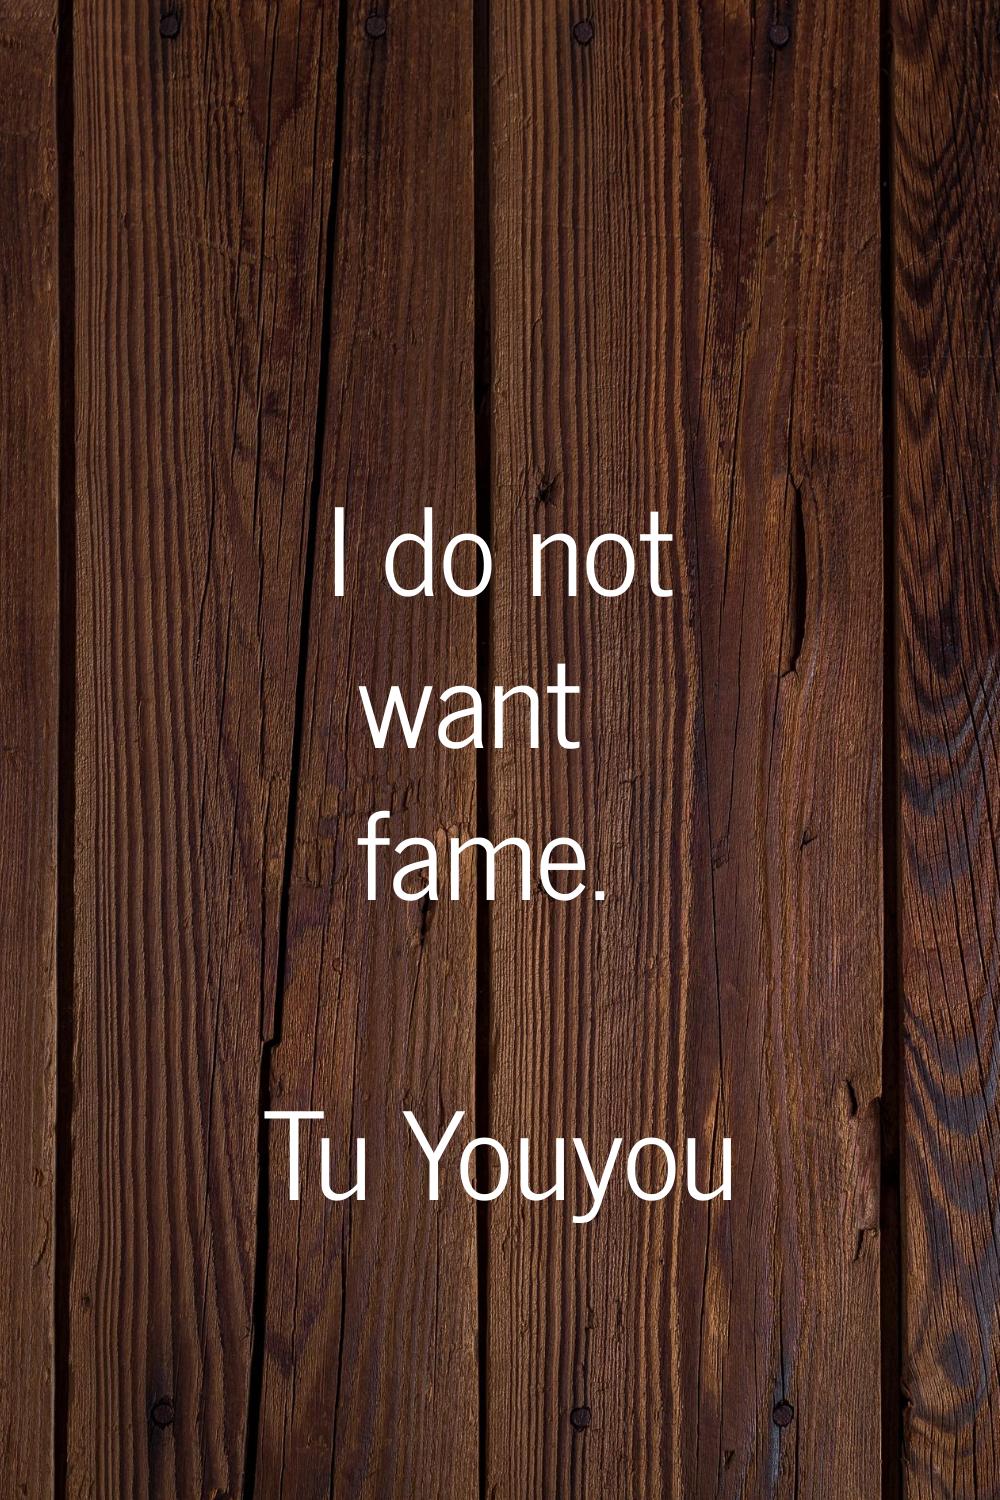 I do not want fame.